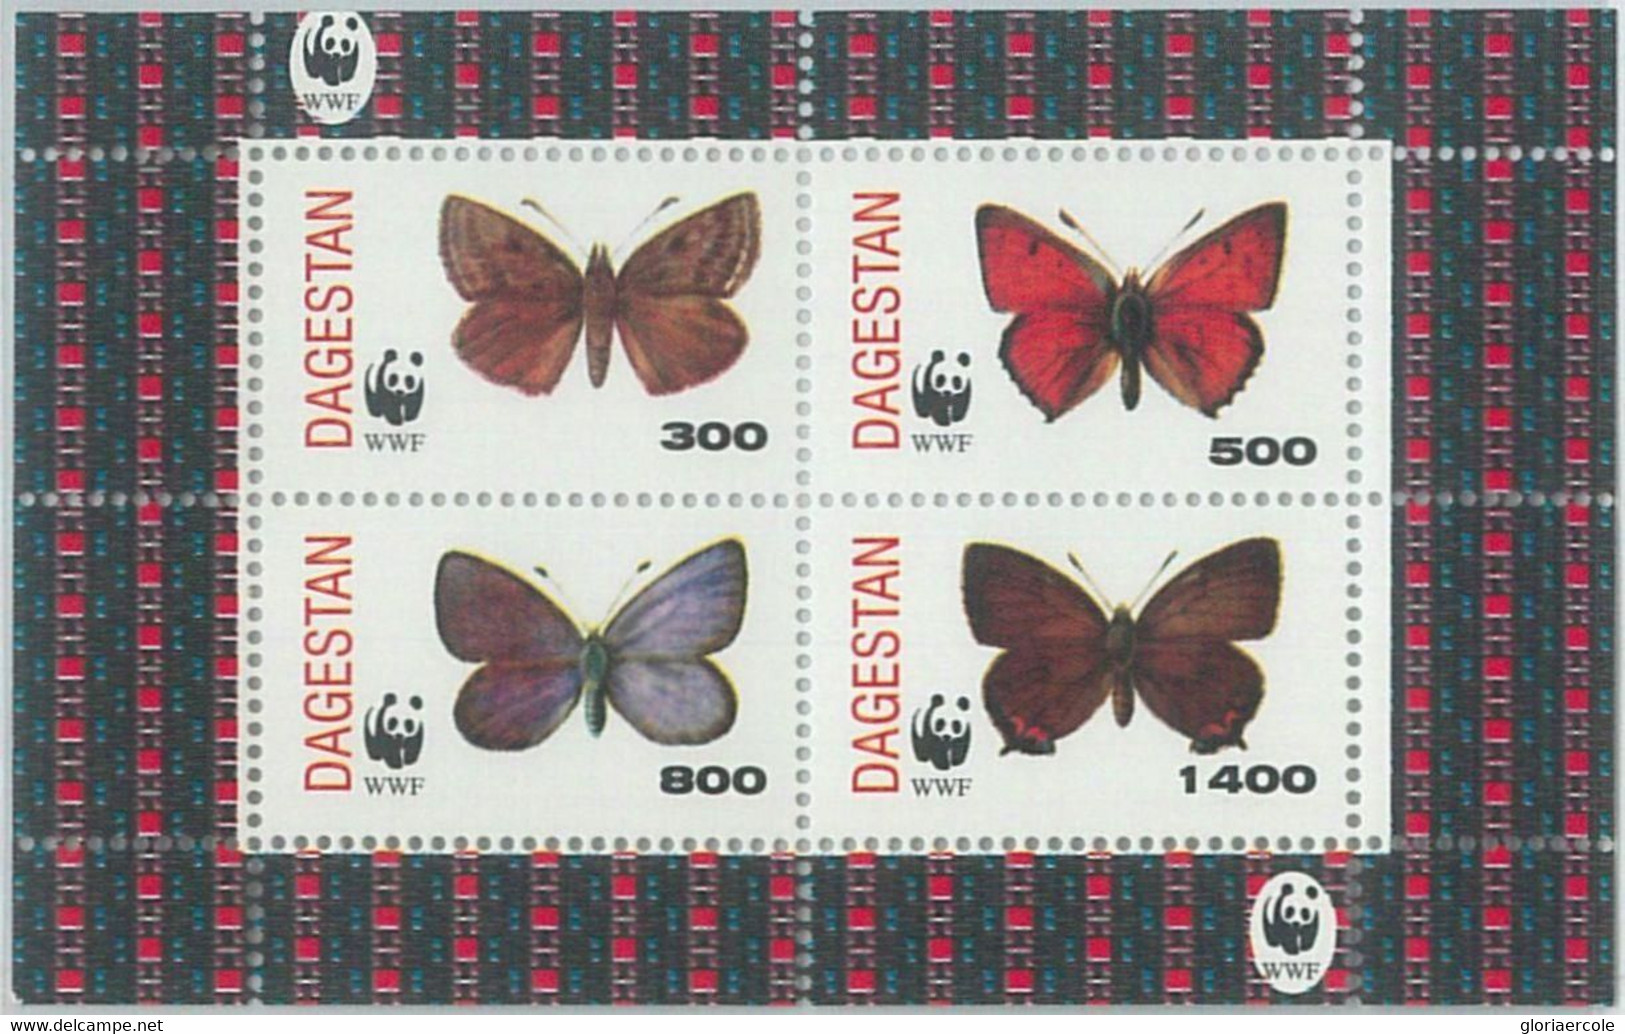 M2000 - RUSSIAN STATE, SHEET: WWF, Butterflies, Insects  R04.22 - Usados